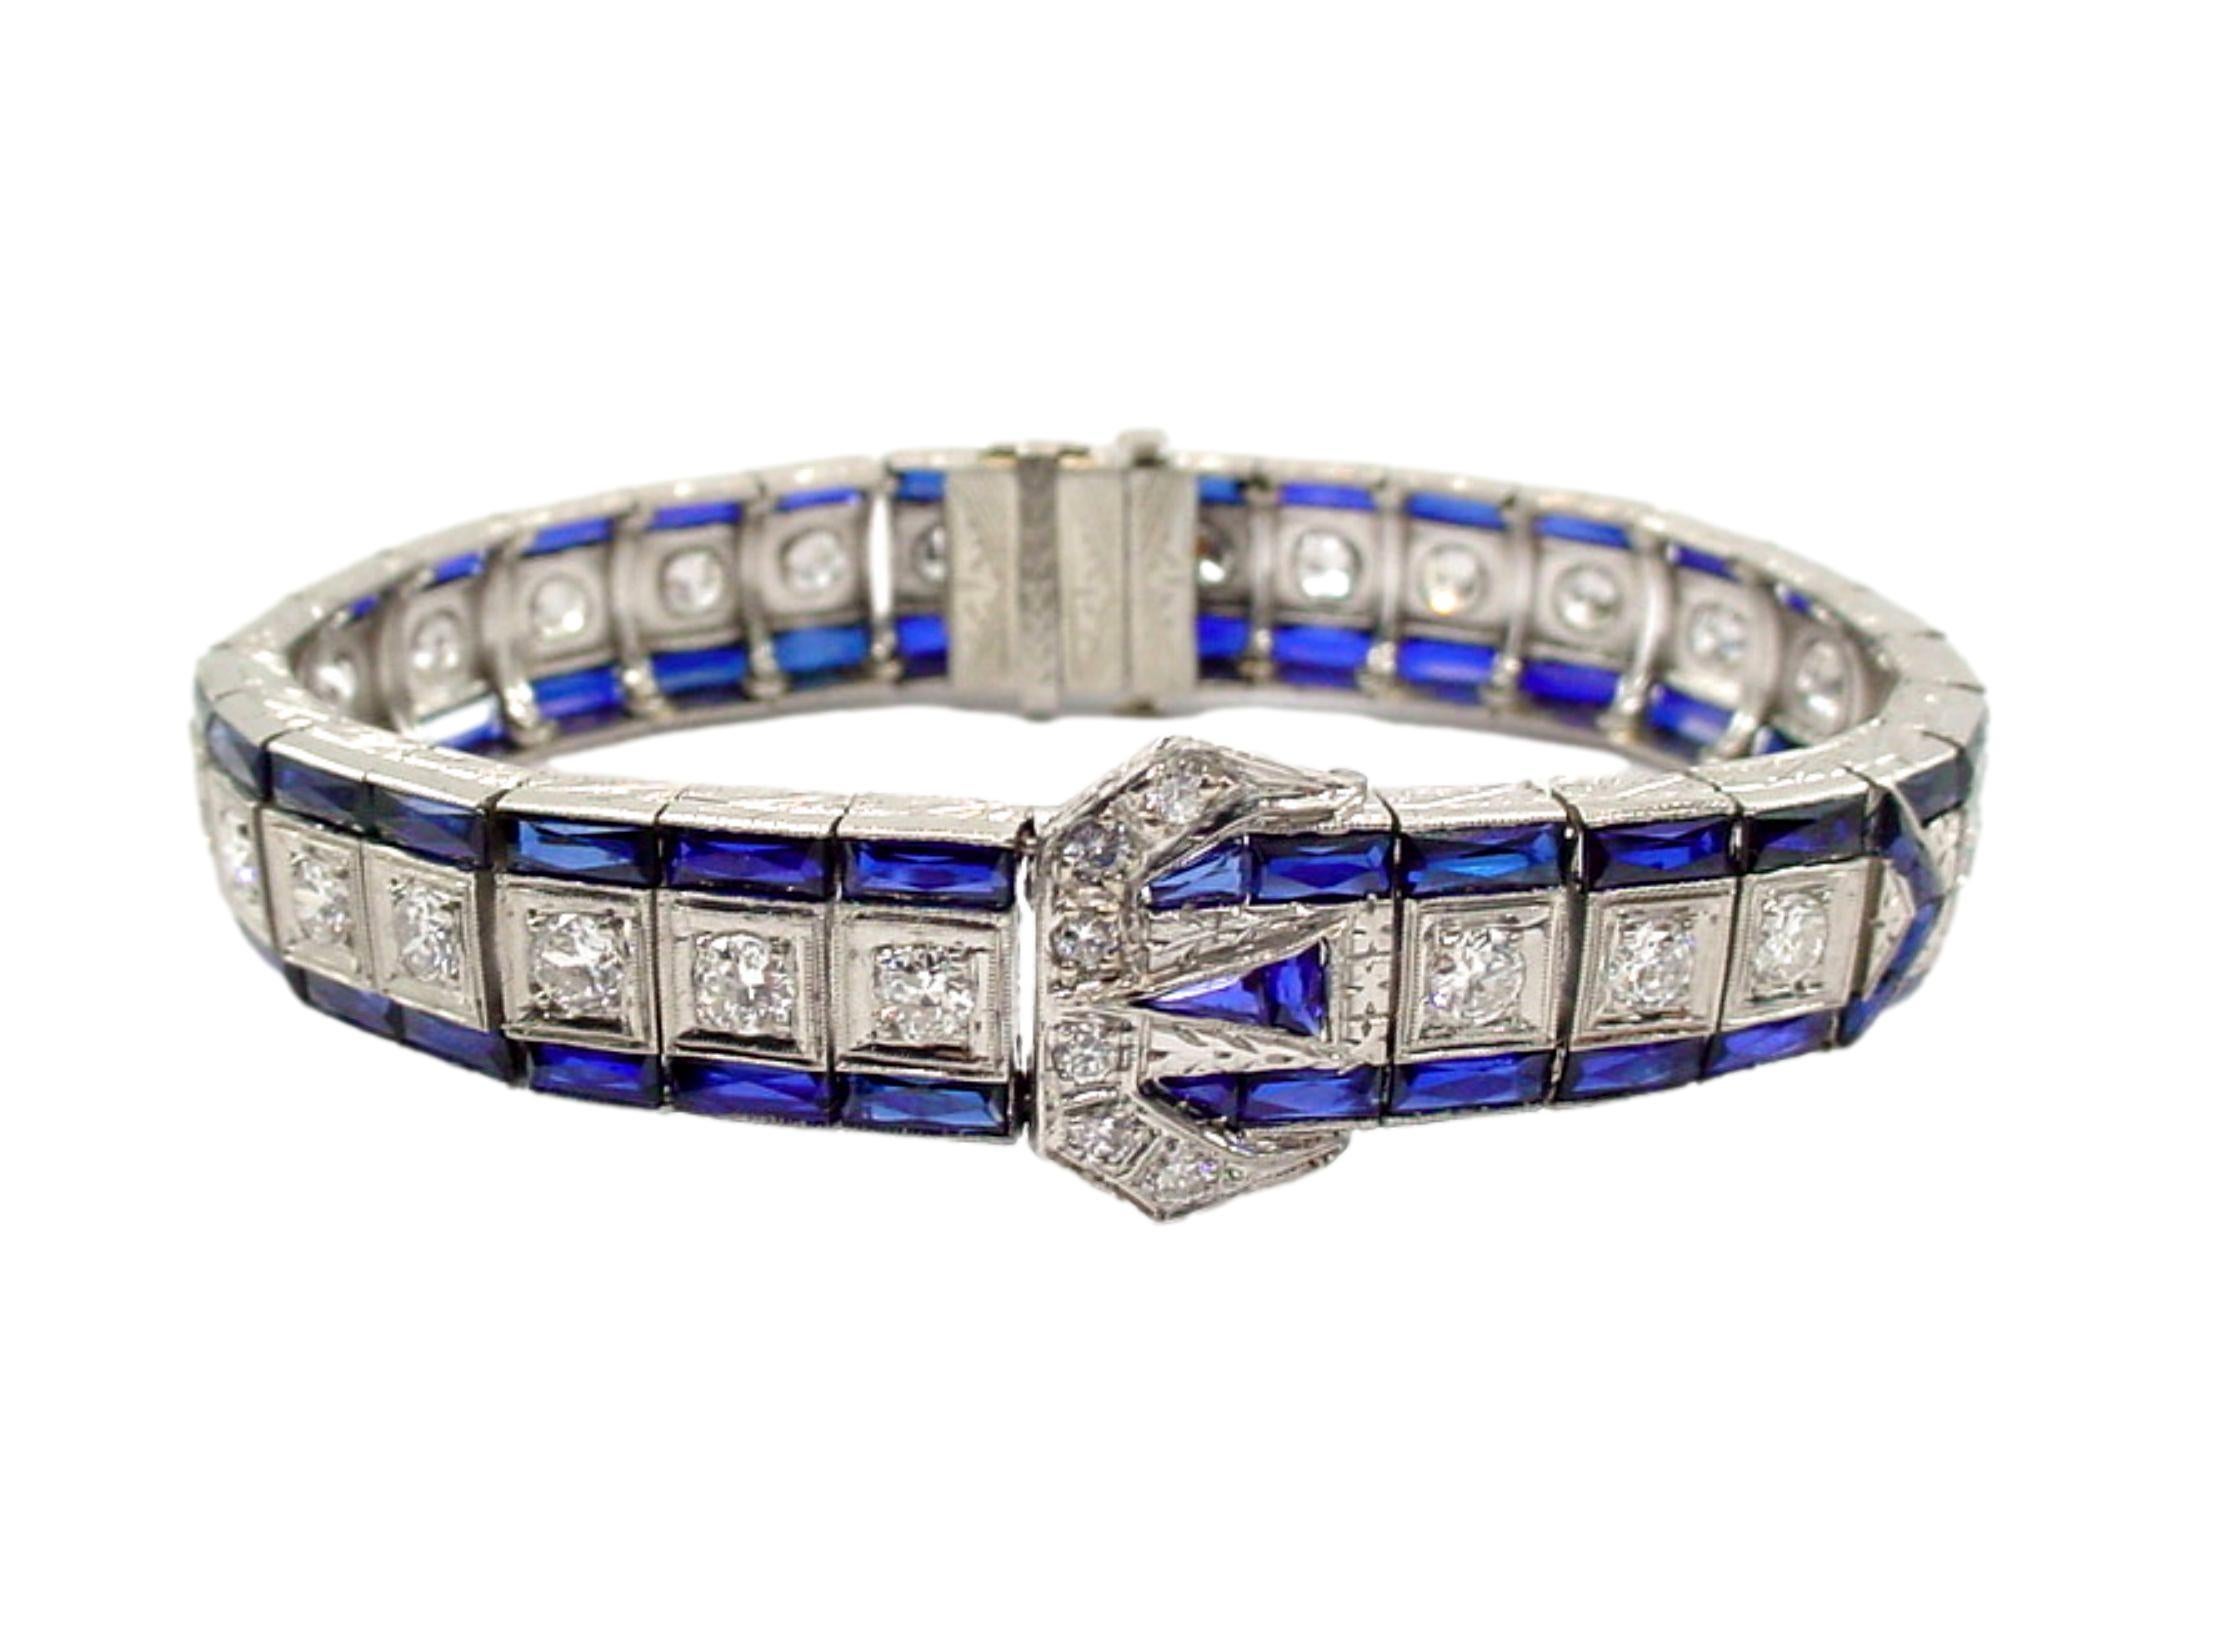 Iconic original Art Deco platinum line bracelet...

Rendered in sumptuous platinum and is chock full of diamonds and synthetic sapphires in a handsome buckle motif...

This beauty will accommodate a SMALL wrist size, length is 6 inches.

Weight is